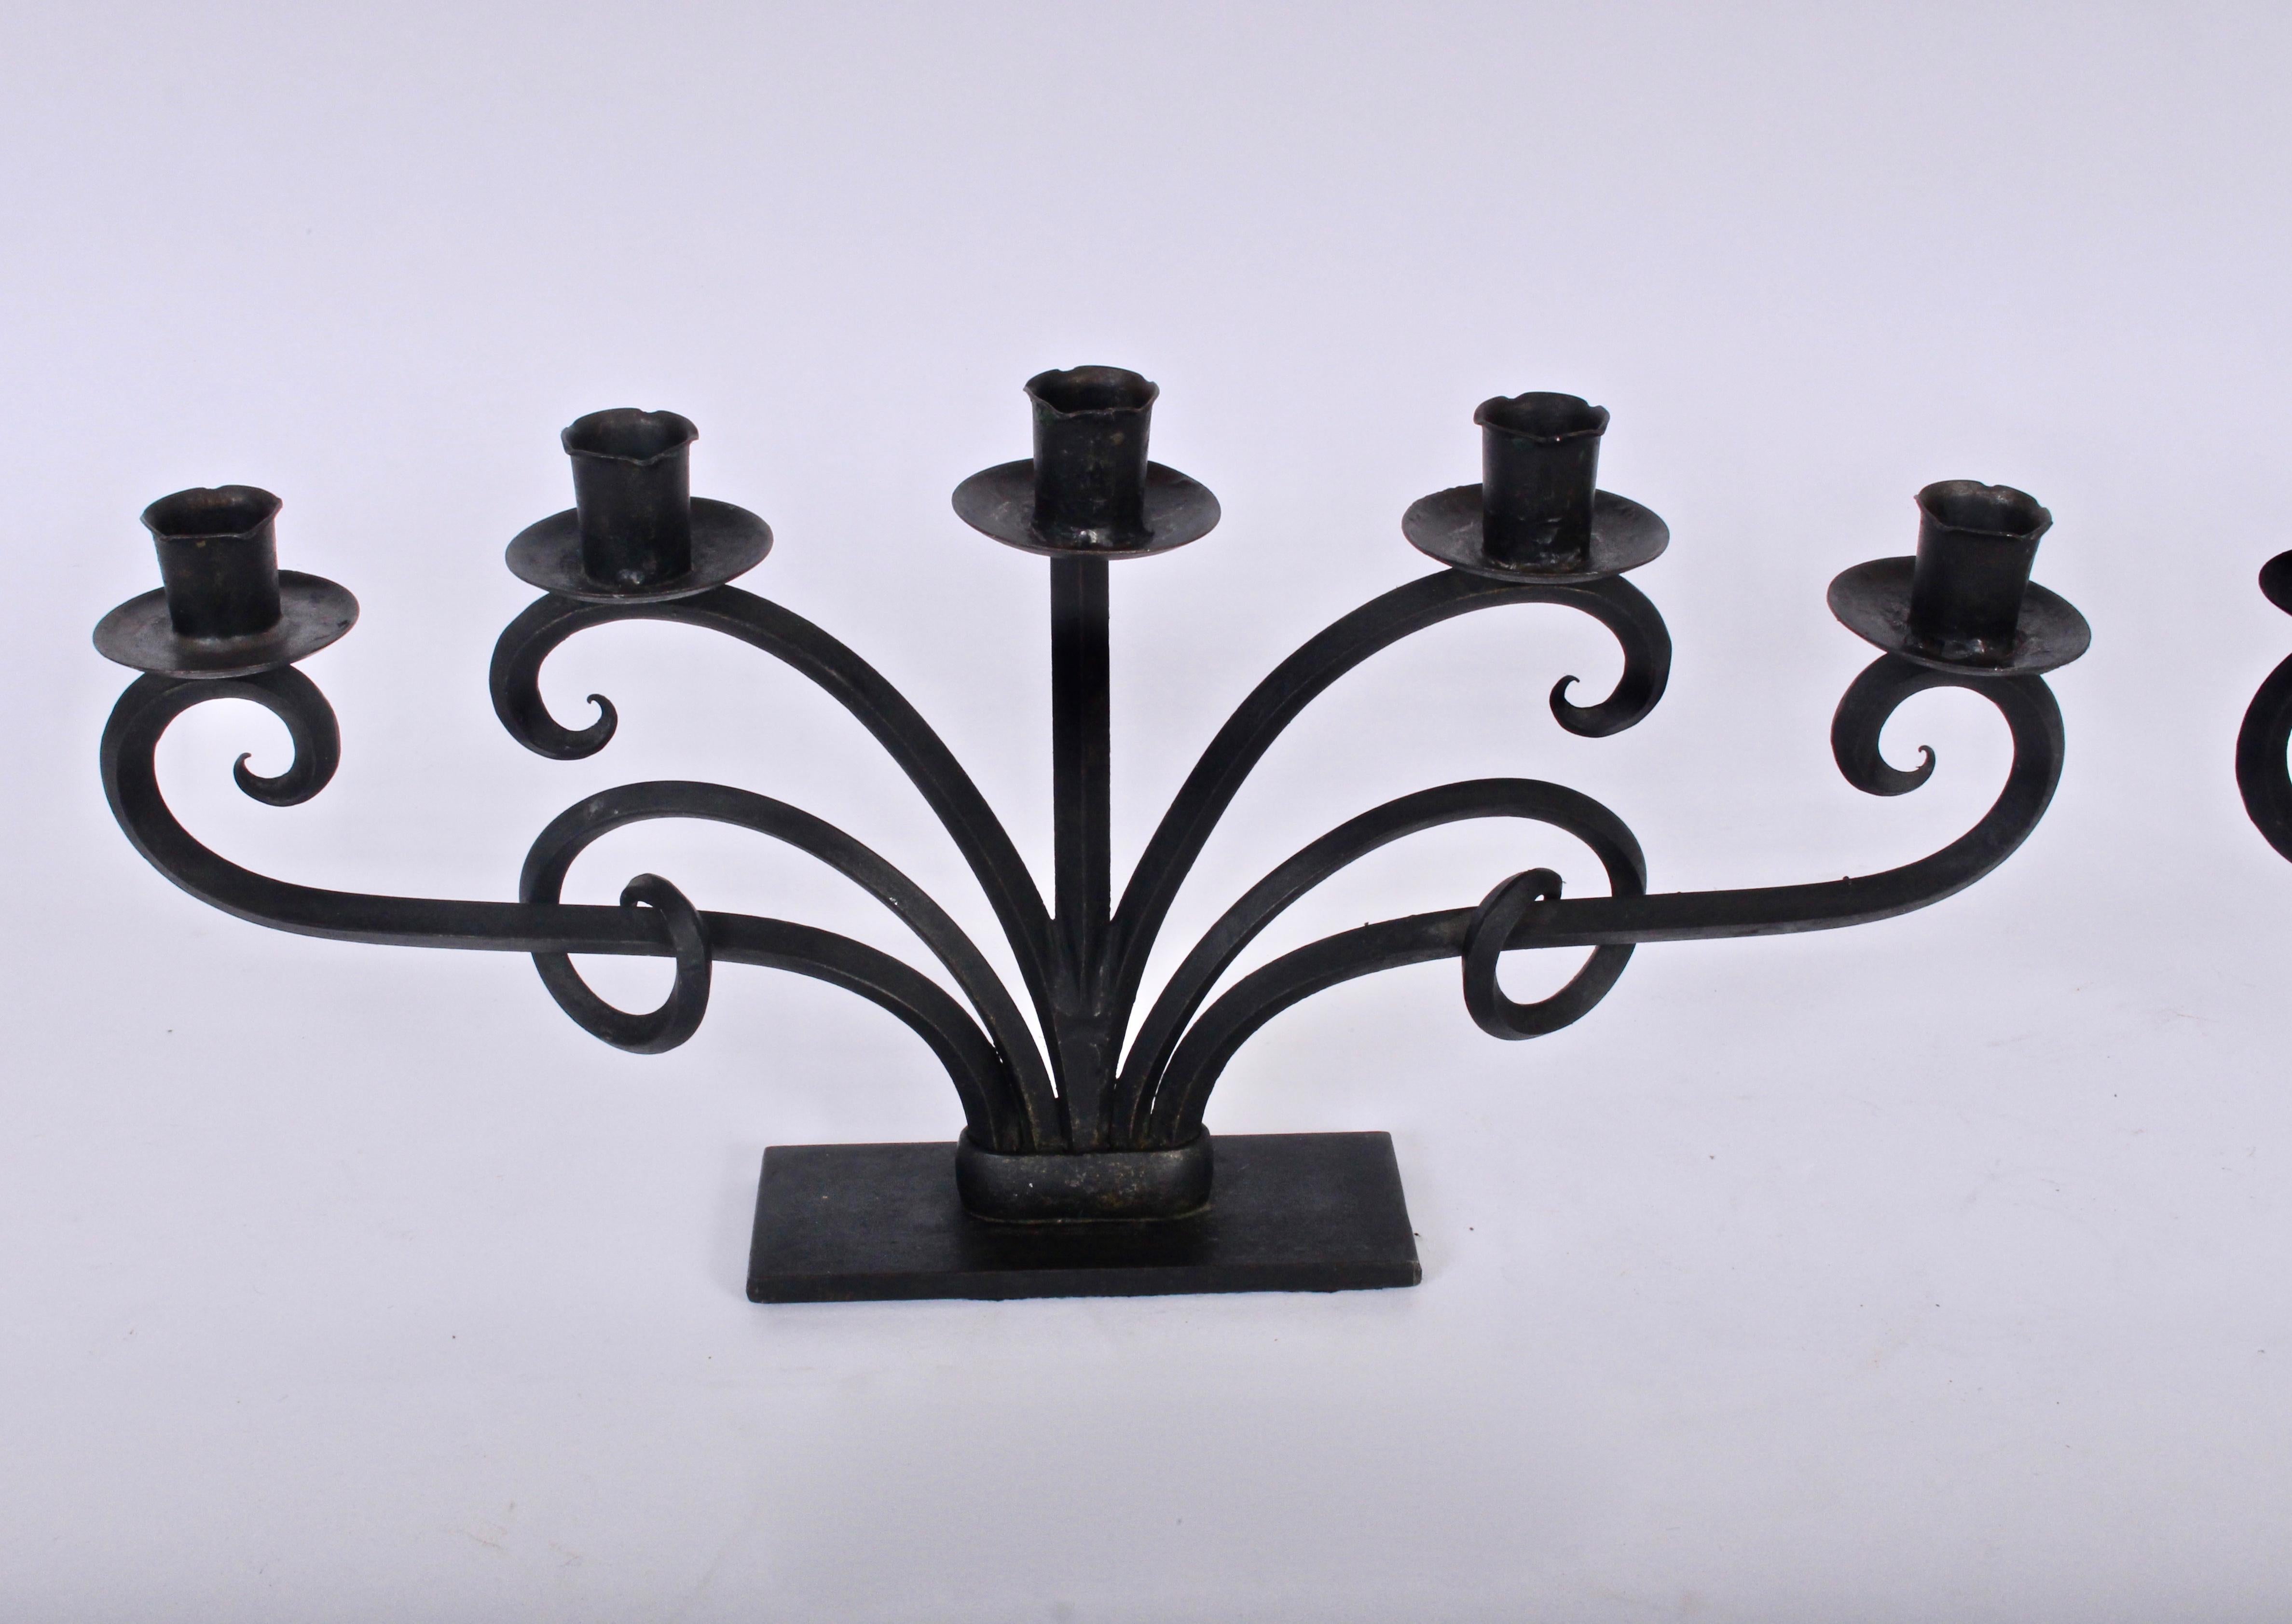 Wide Pair of Norwegian Modern handcrafted six branch scrolled black iron candlesticks, in the manner of Just Andersen.  With Iron bobeches for candle drippings and sculptural scroll design. Two pieces approximately three feet long when placed side